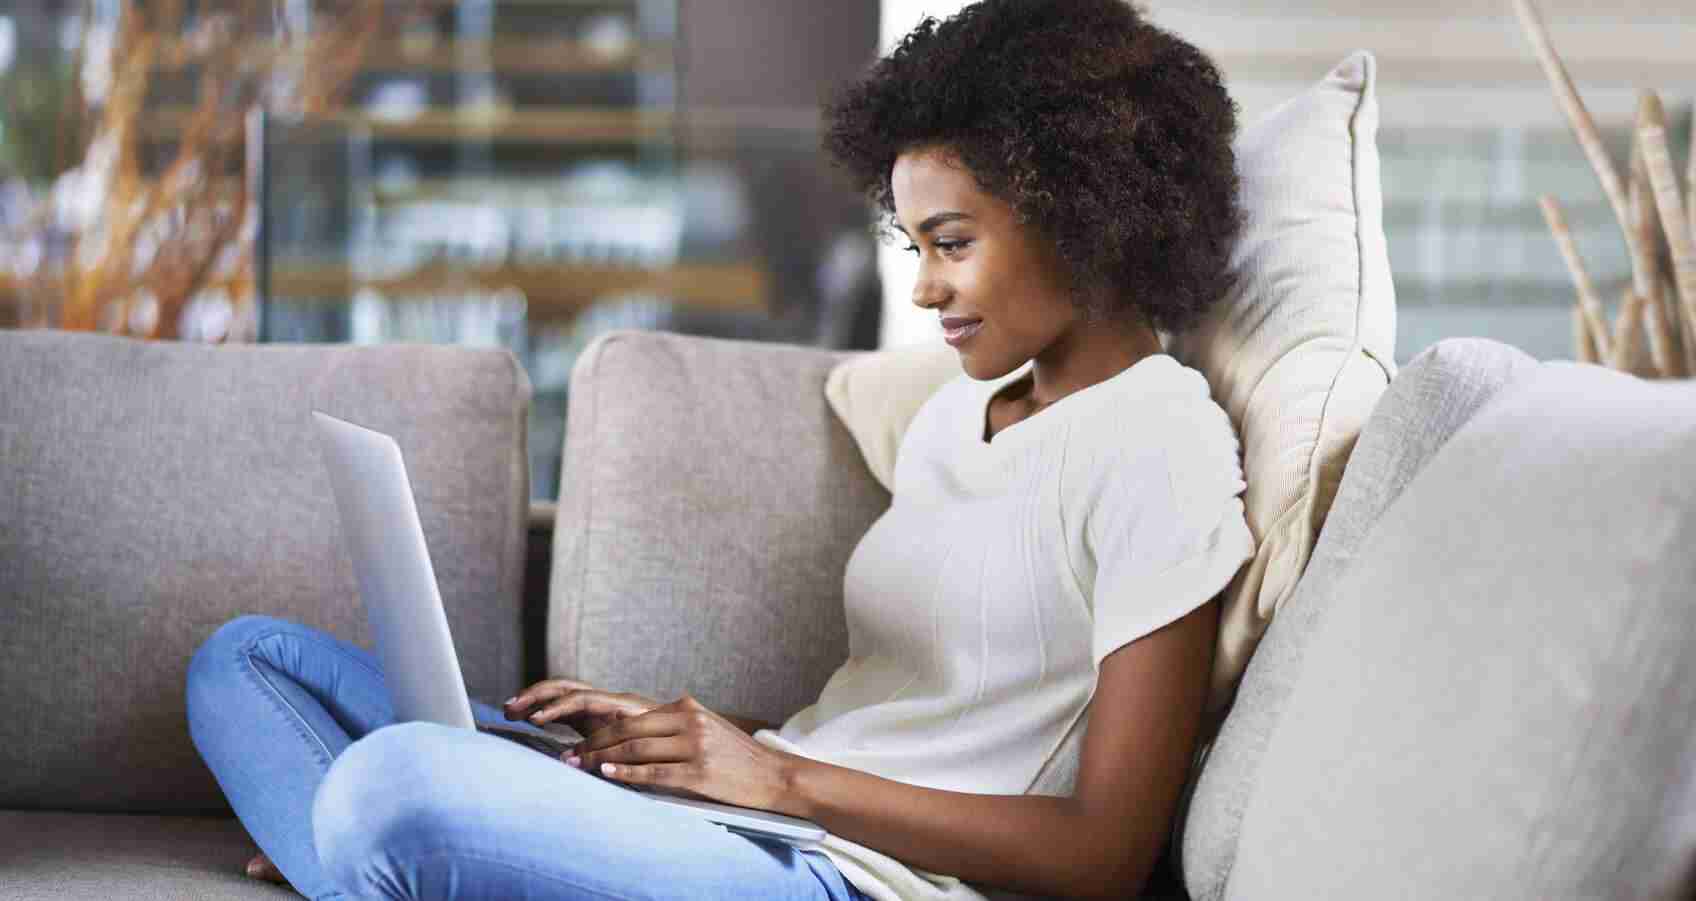 Smiling young woman sitting on couch with a laptop